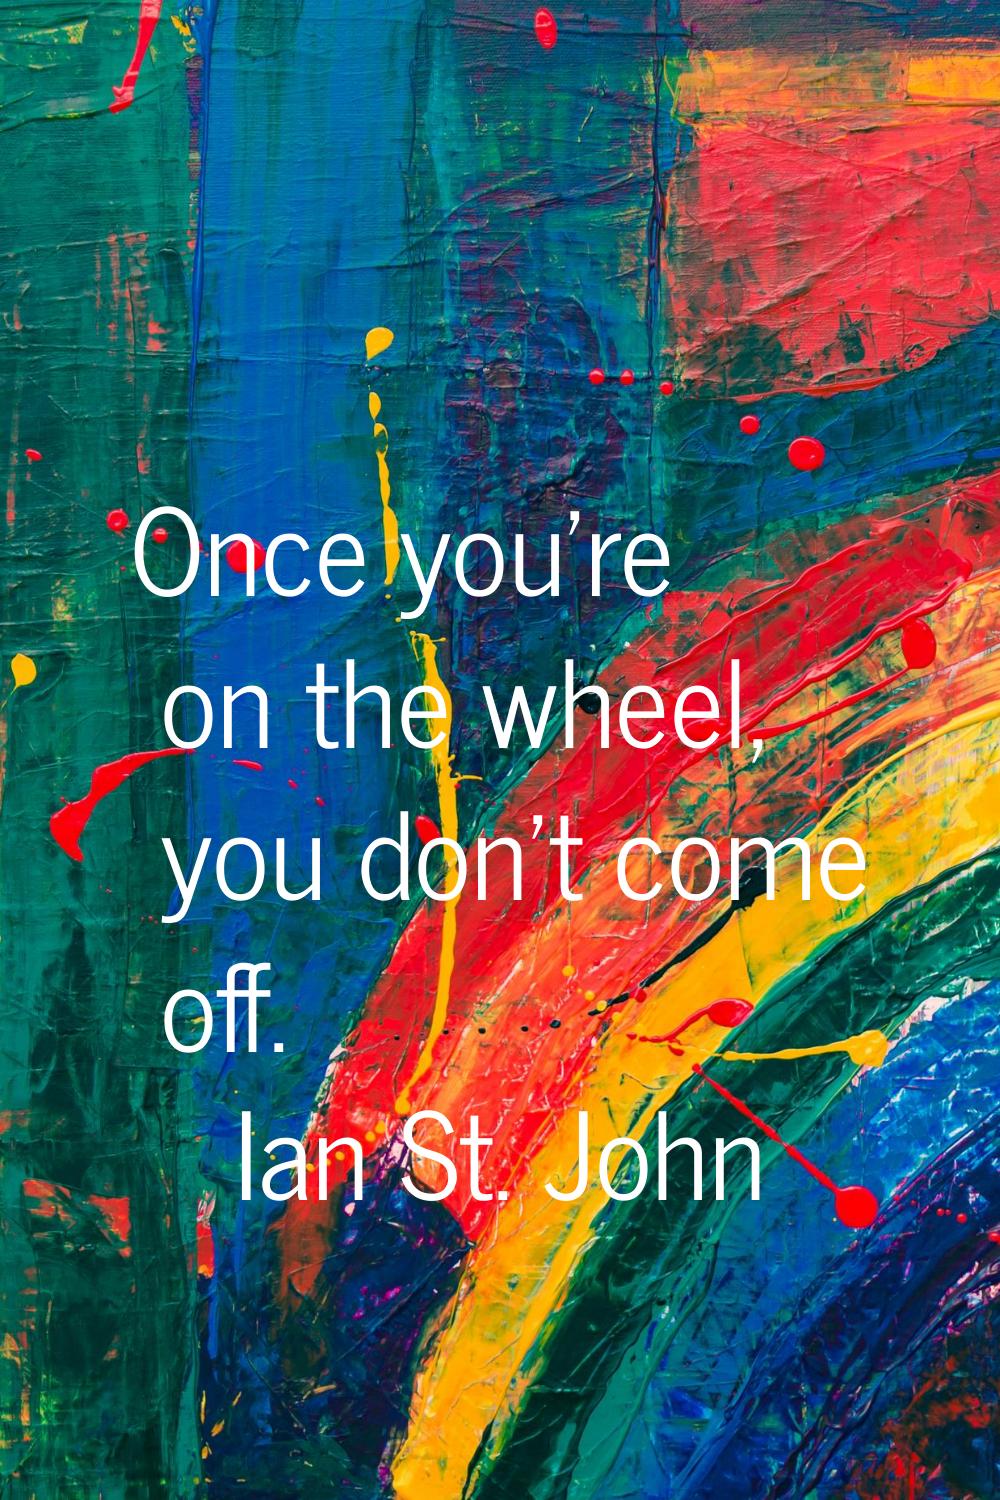 Once you're on the wheel, you don't come off.